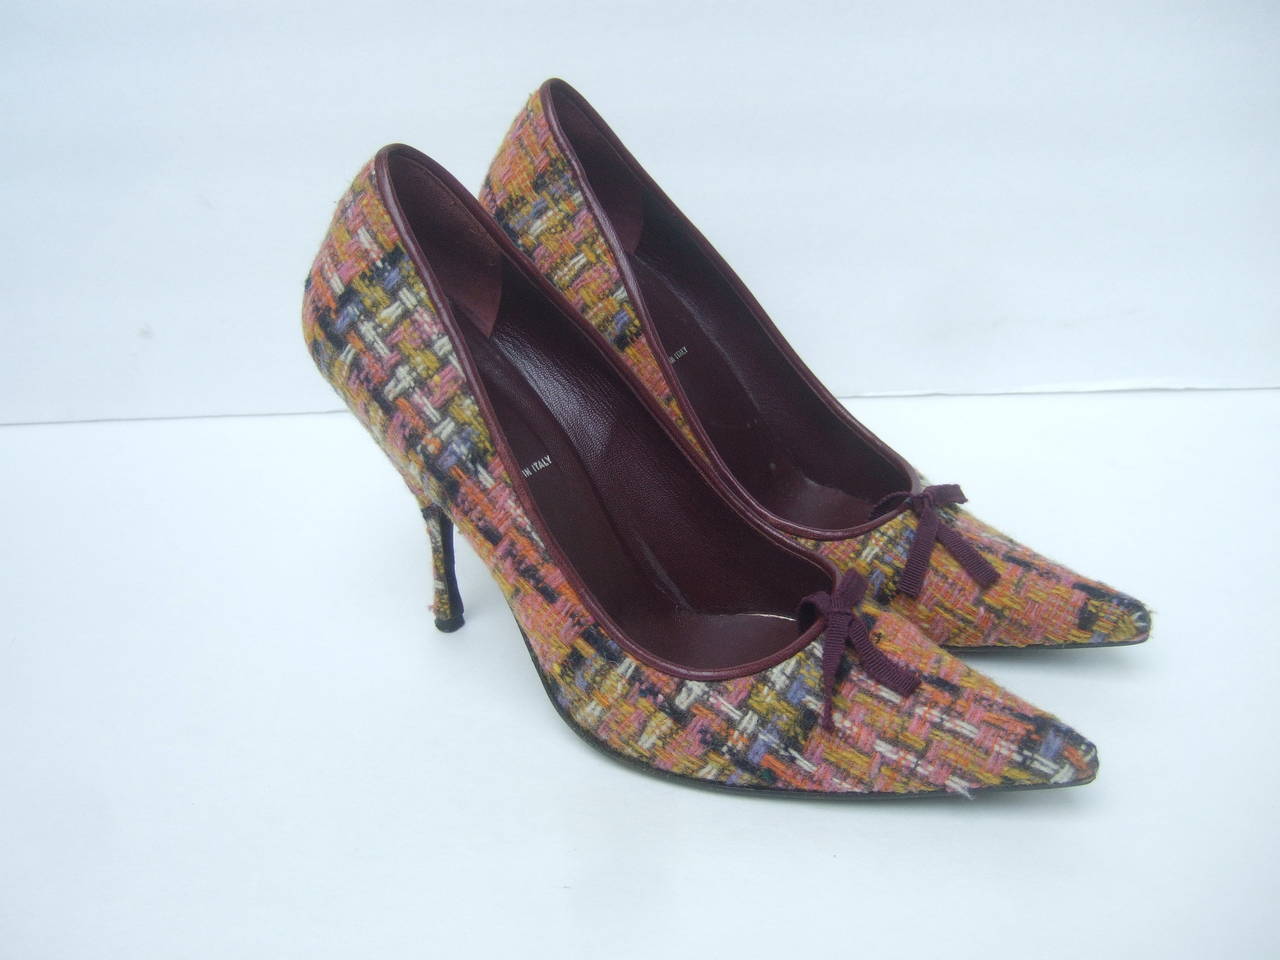 Miu Miu Plaid Wool Pumps Made in Italy Size 38 For Sale 2